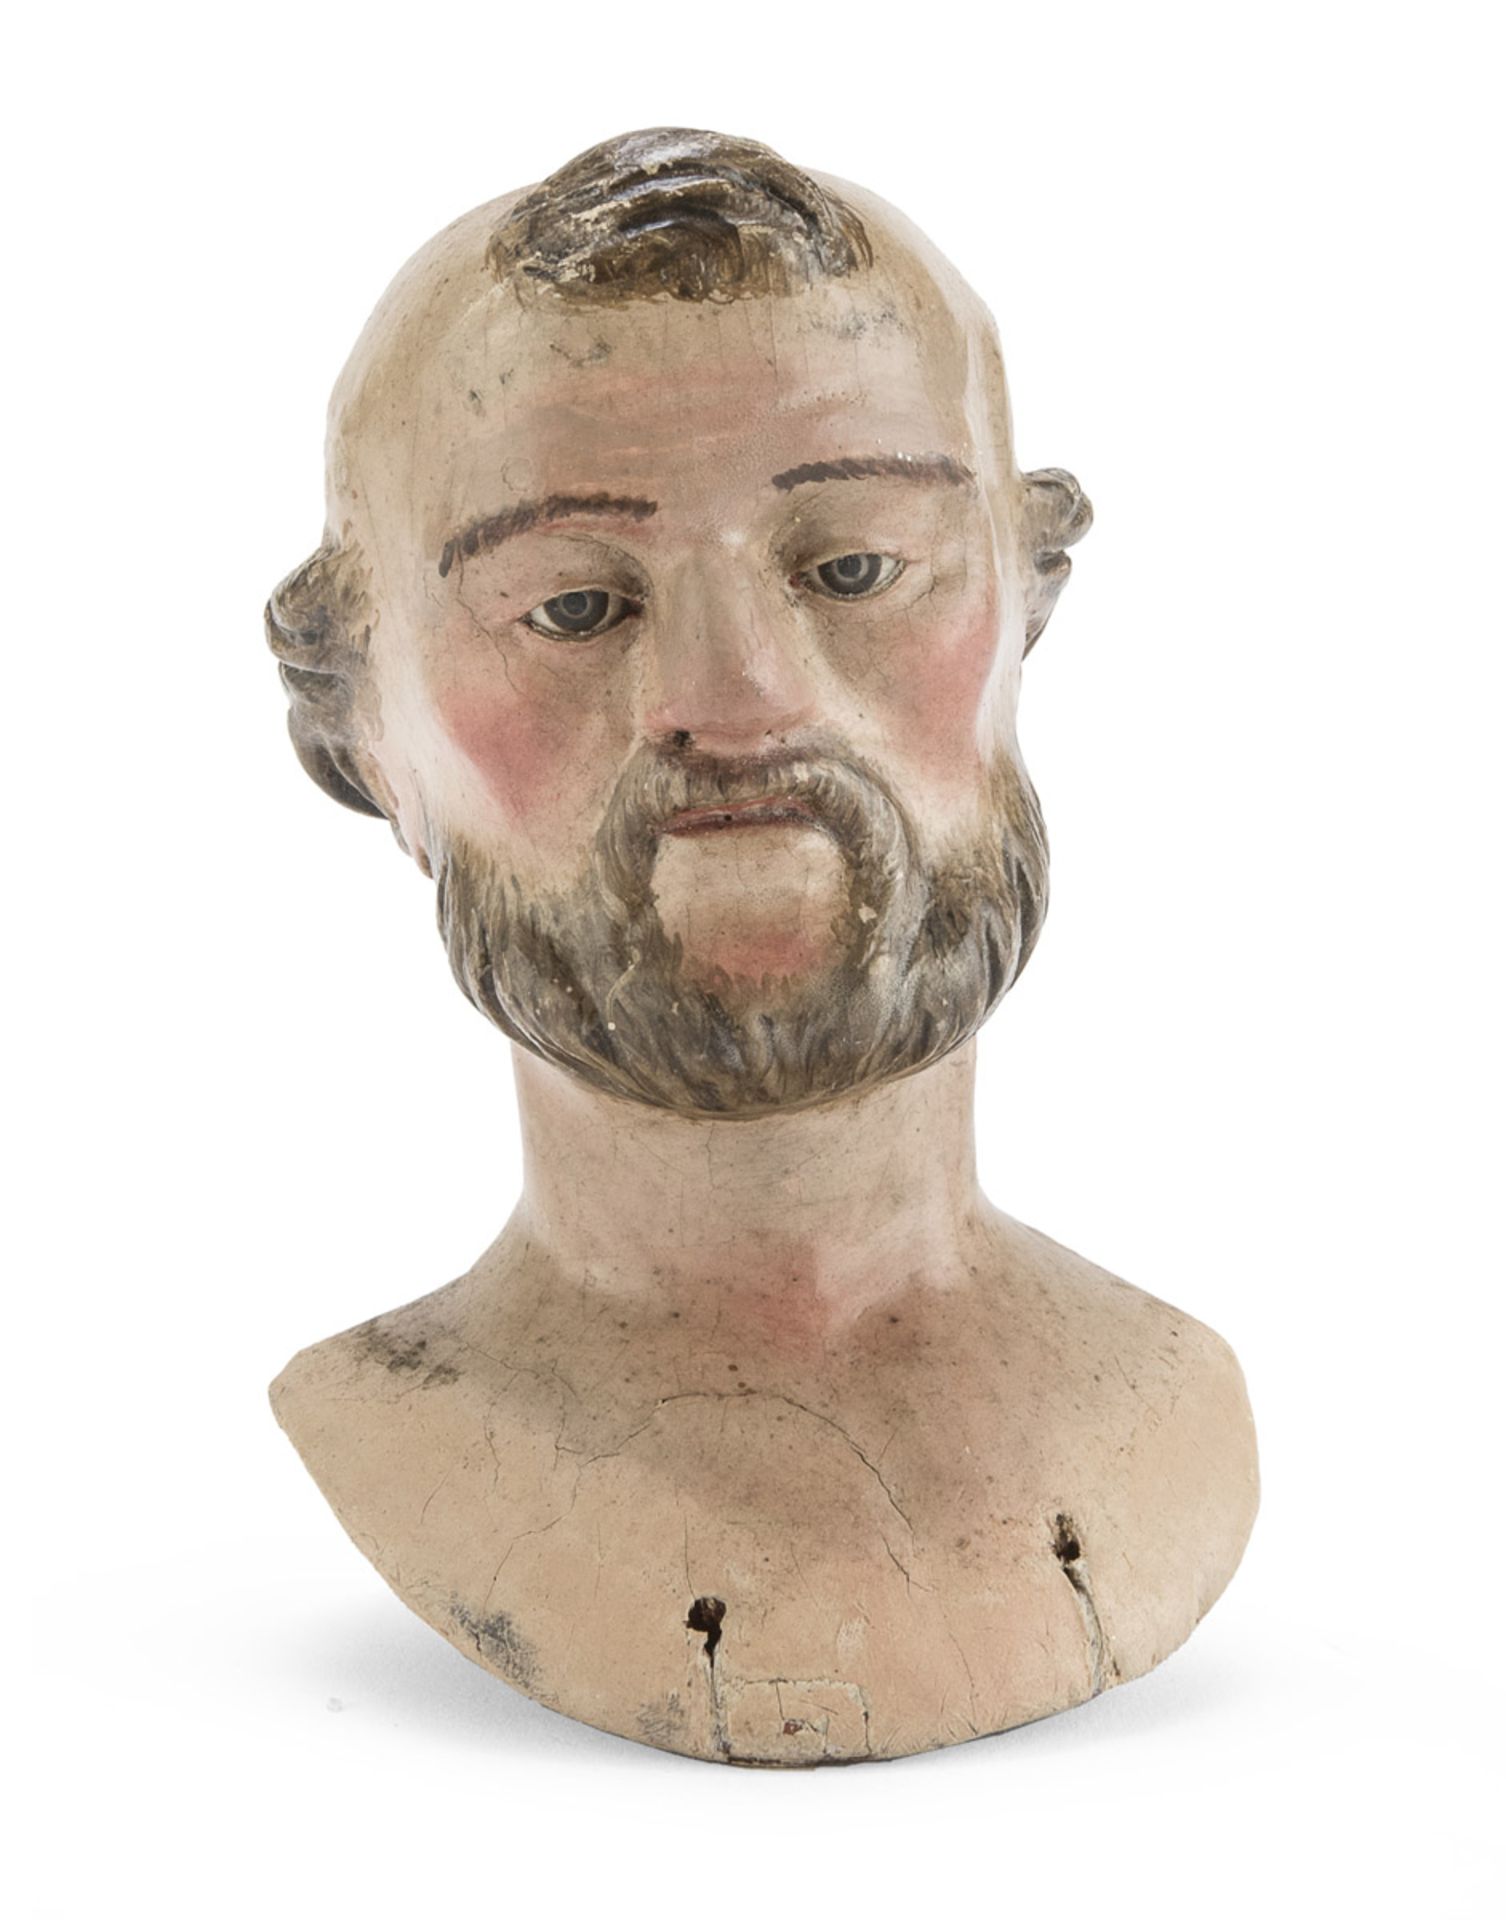 MAN'S BUST - NAPLES EARLY 19th CENTURY